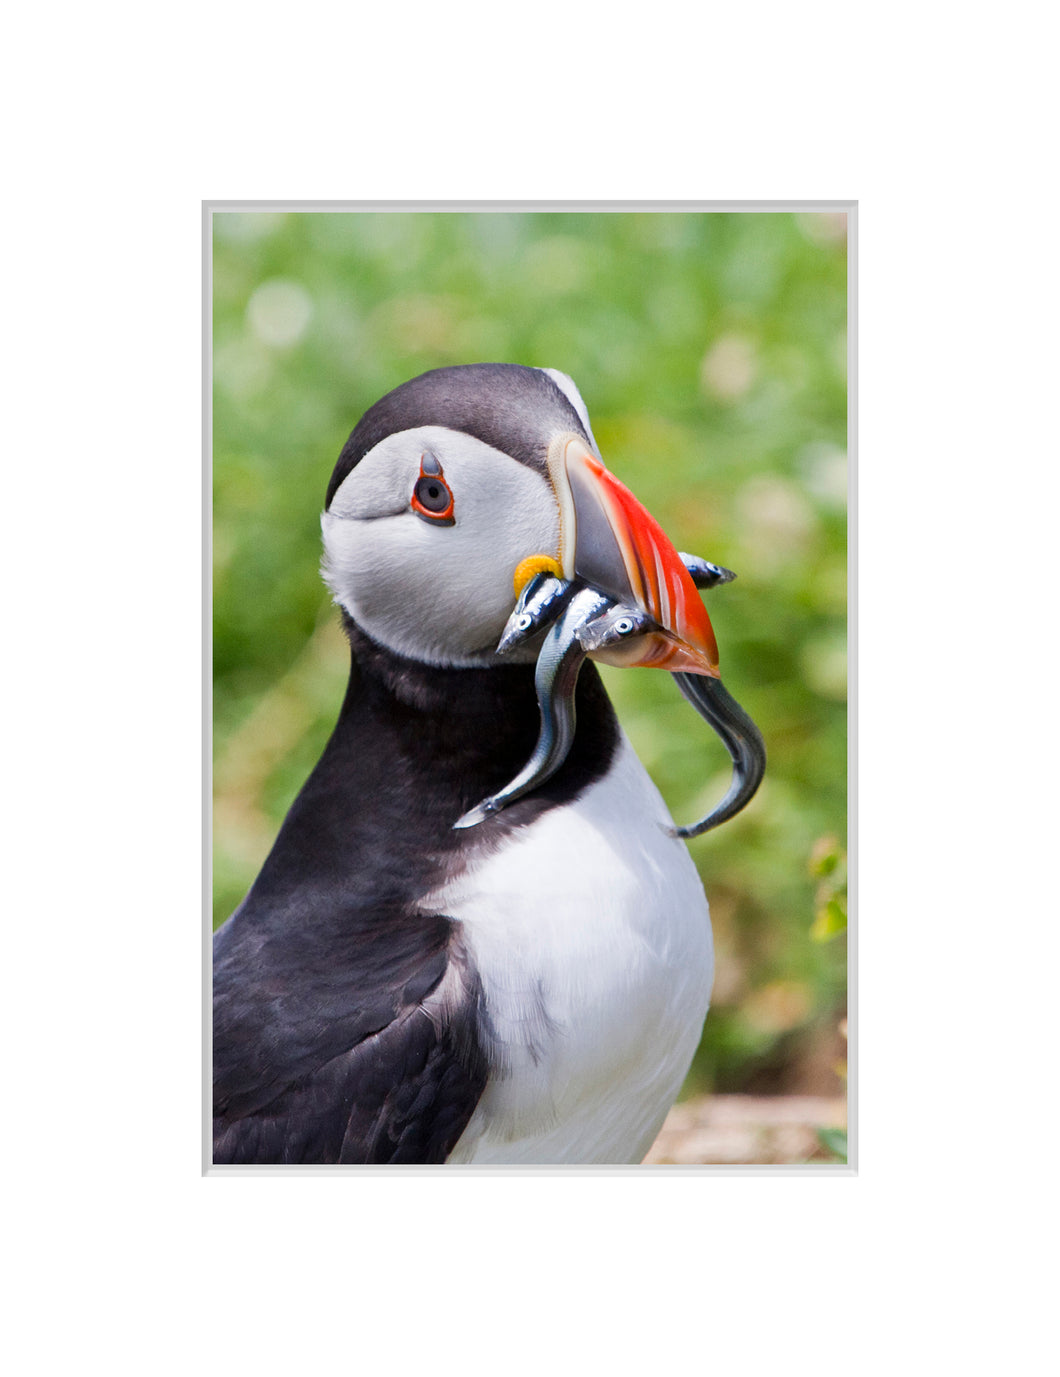 Puffin with Catch, Great Saltee, Co. Wexford - A4 print